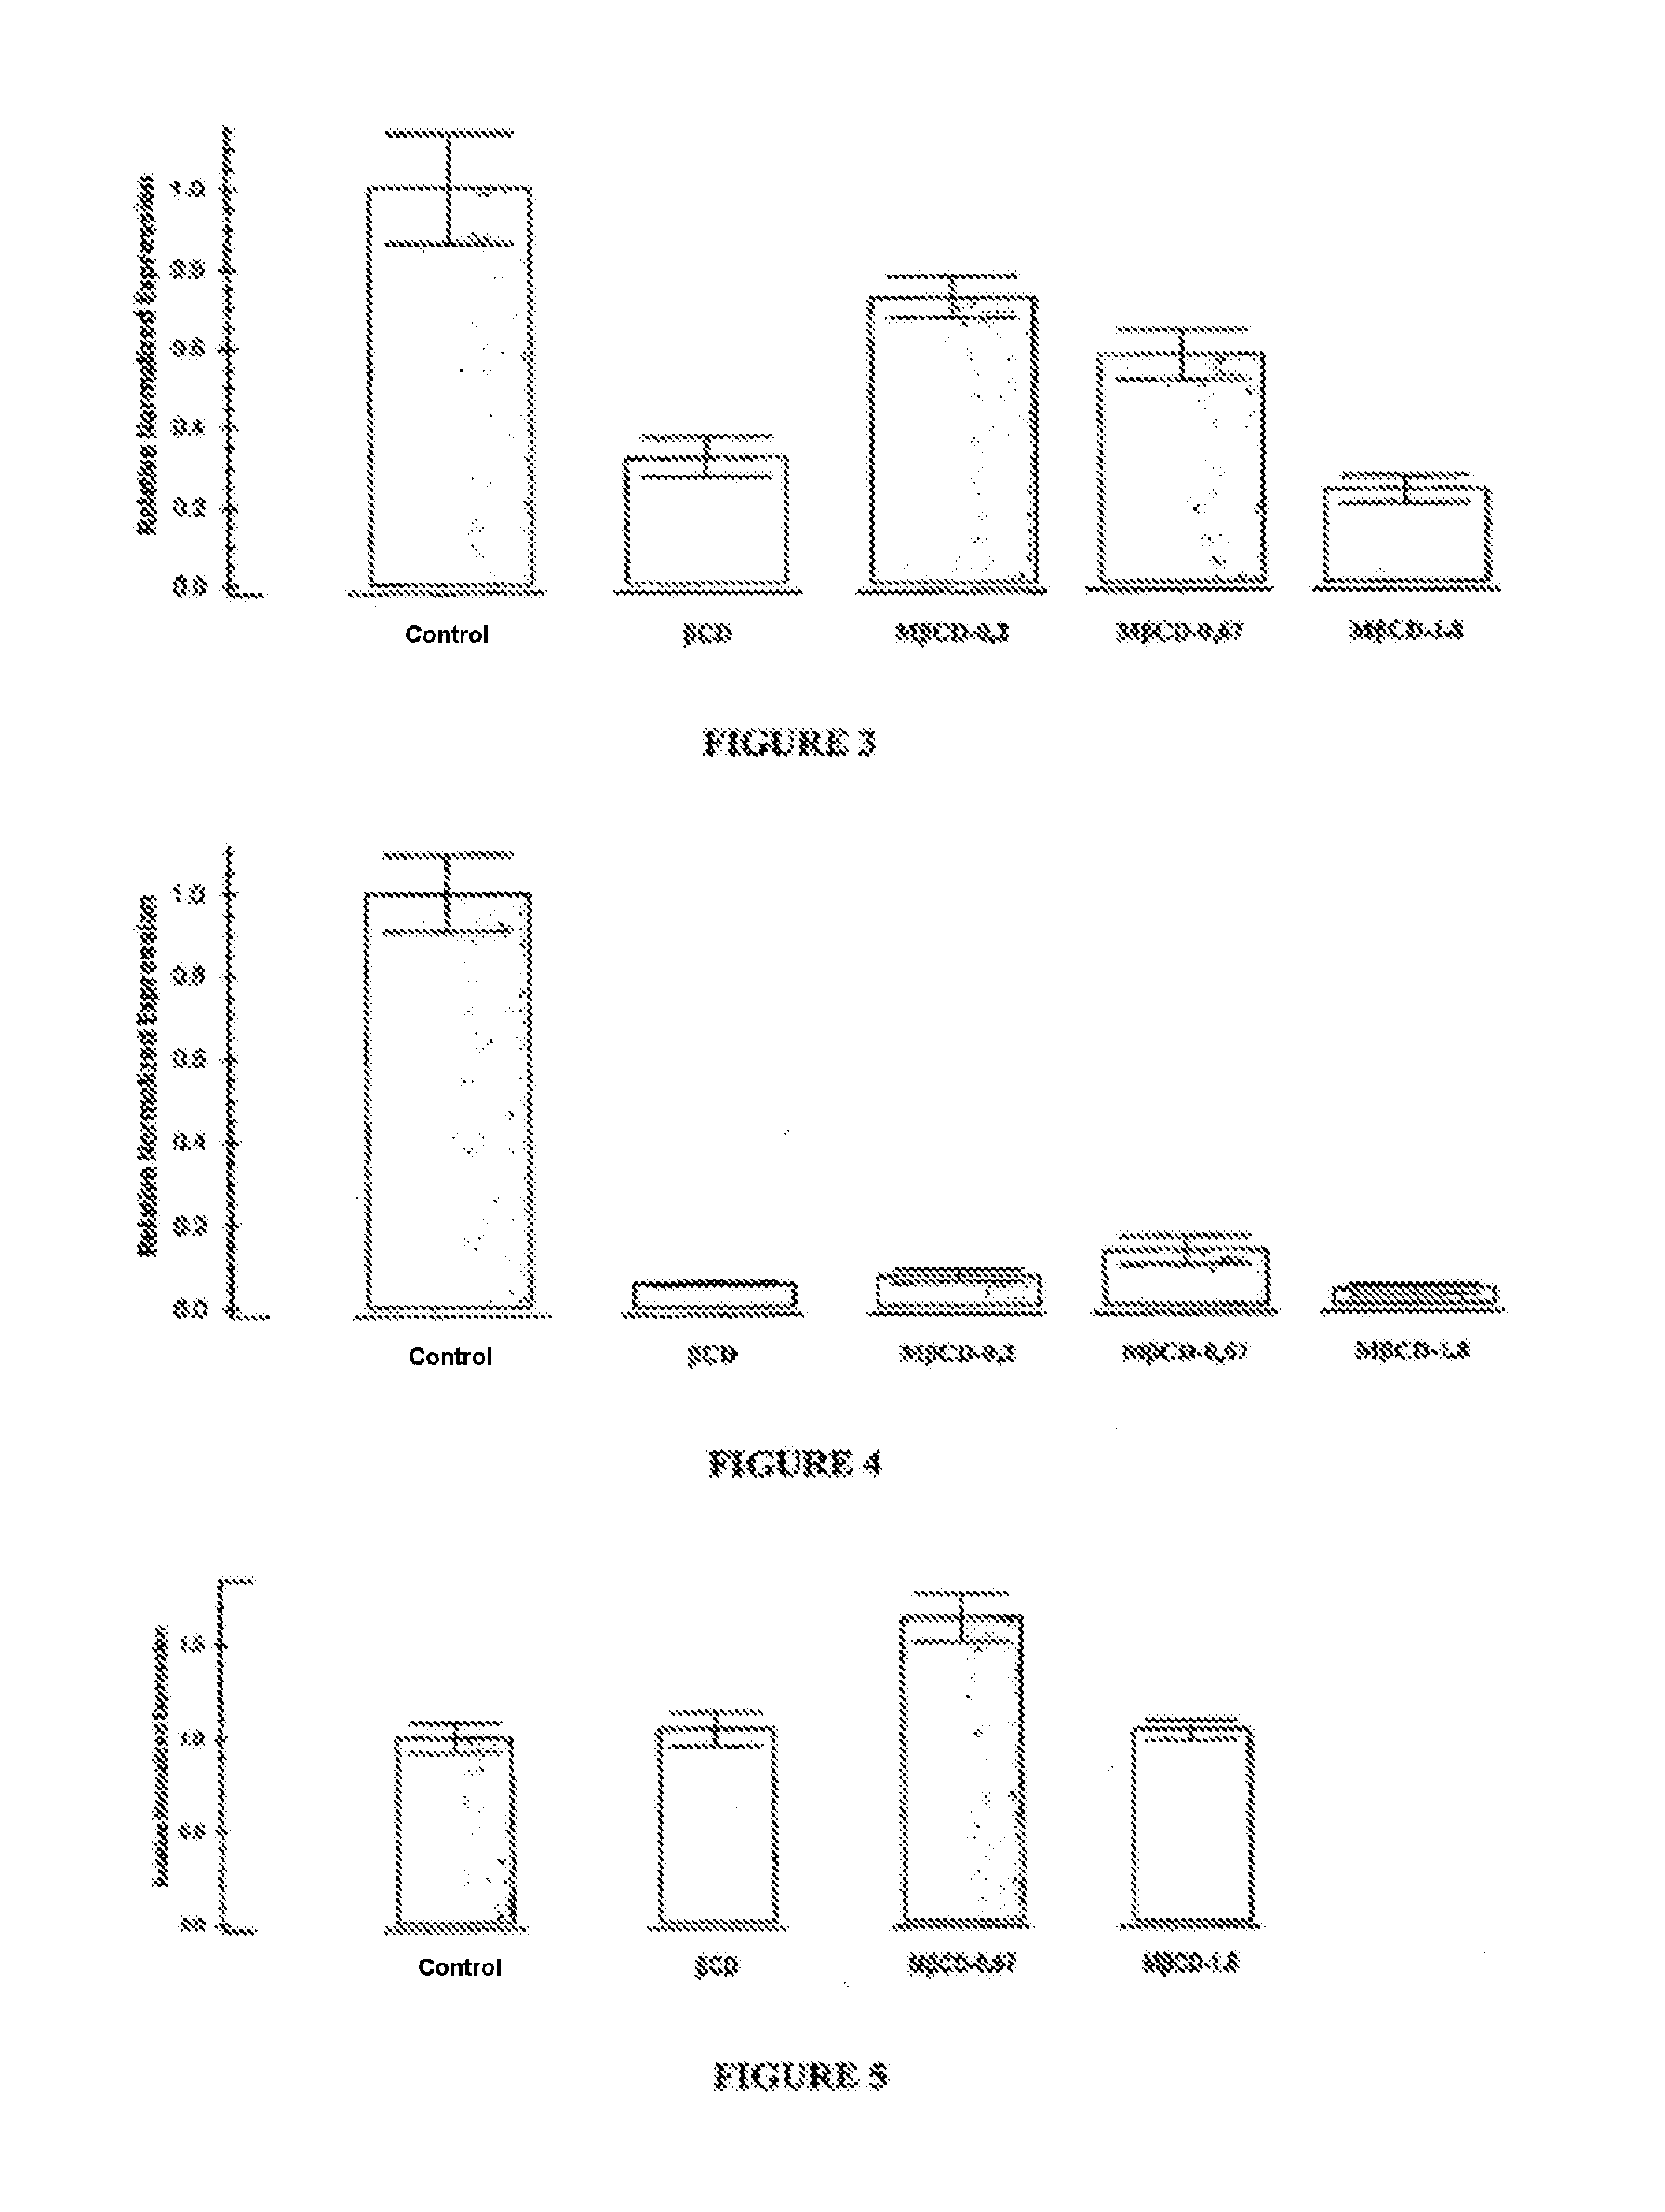 Compositions based on methyl cyclodextrins for the treatment and/or prevention of diseases by increasing the hdl cholesterol level